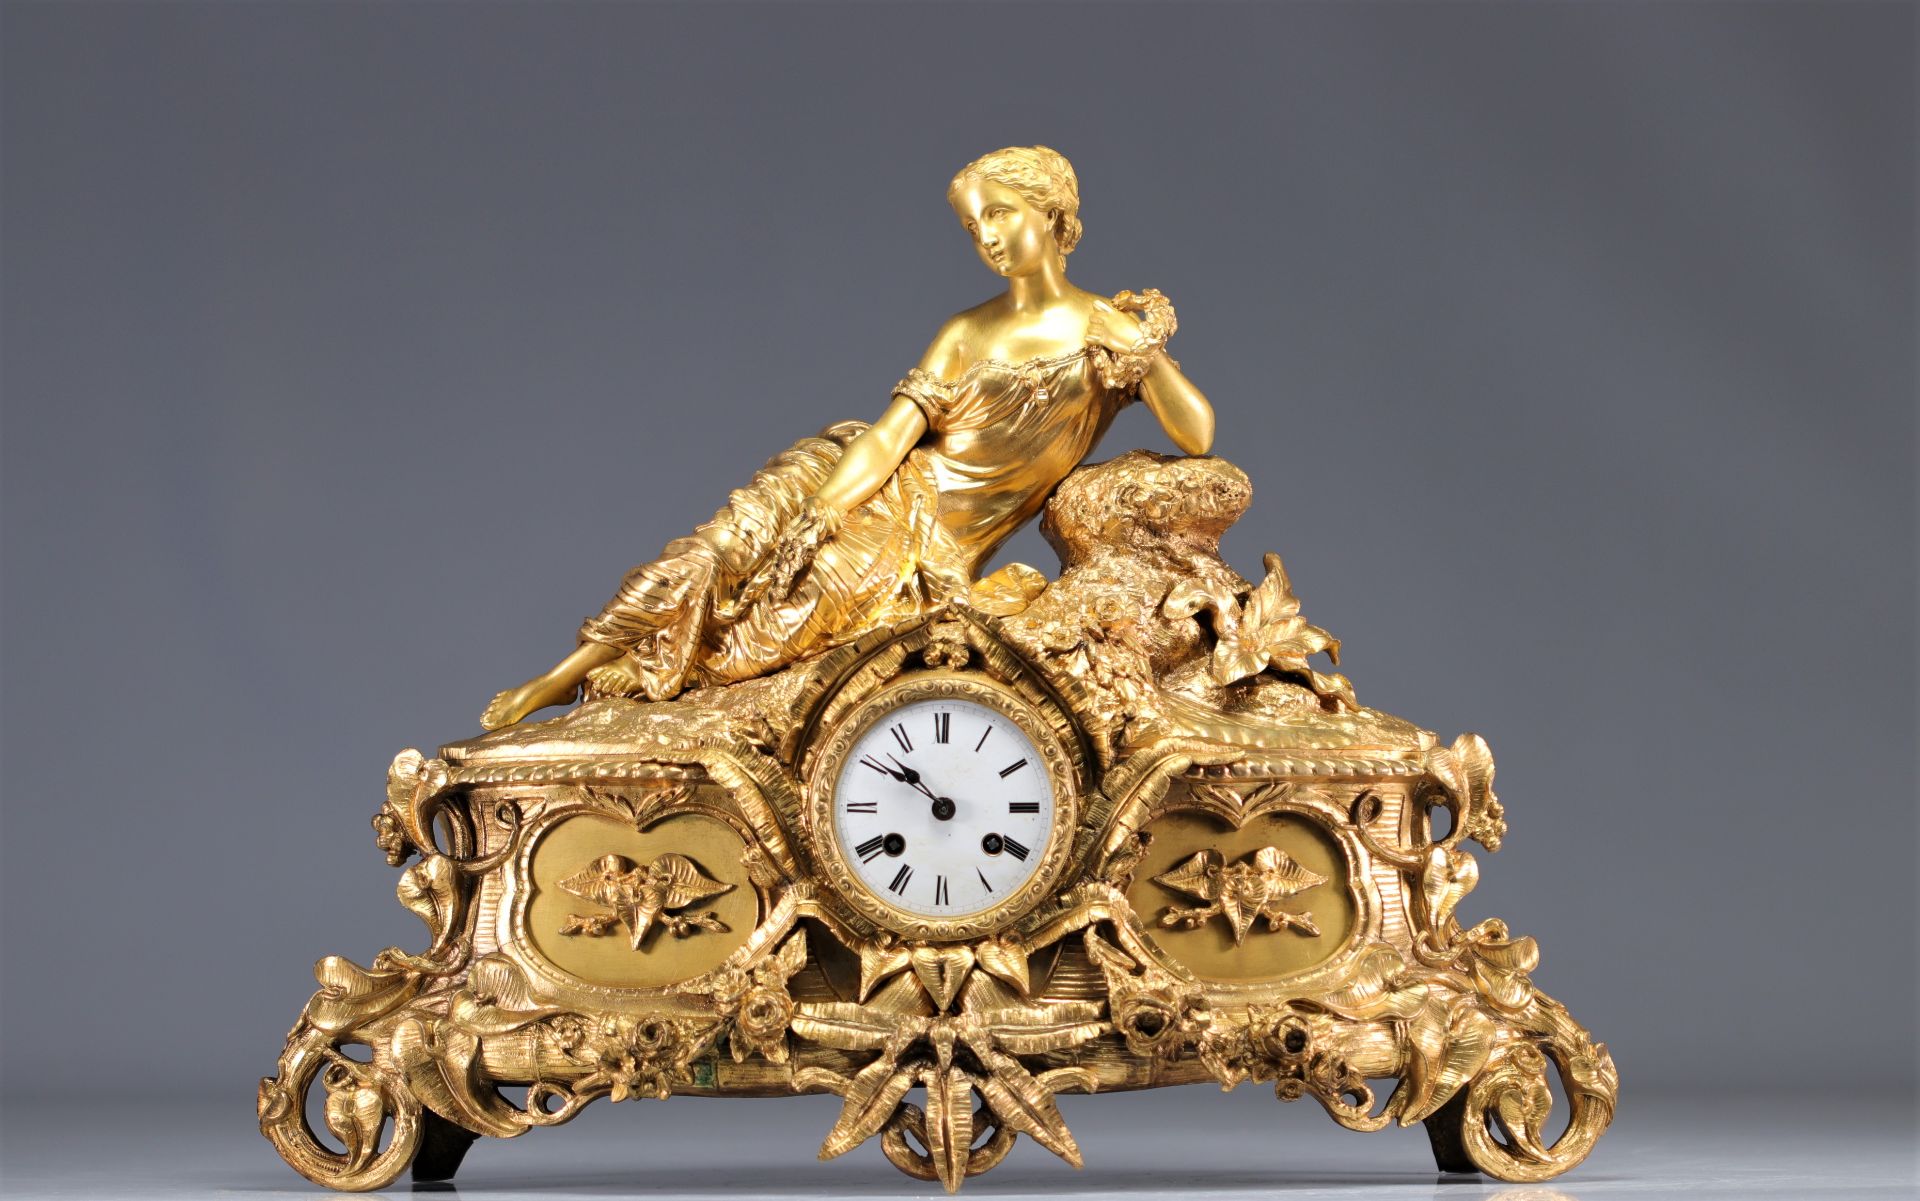 Gilt bronze clock surmounted by a young woman from 19th century